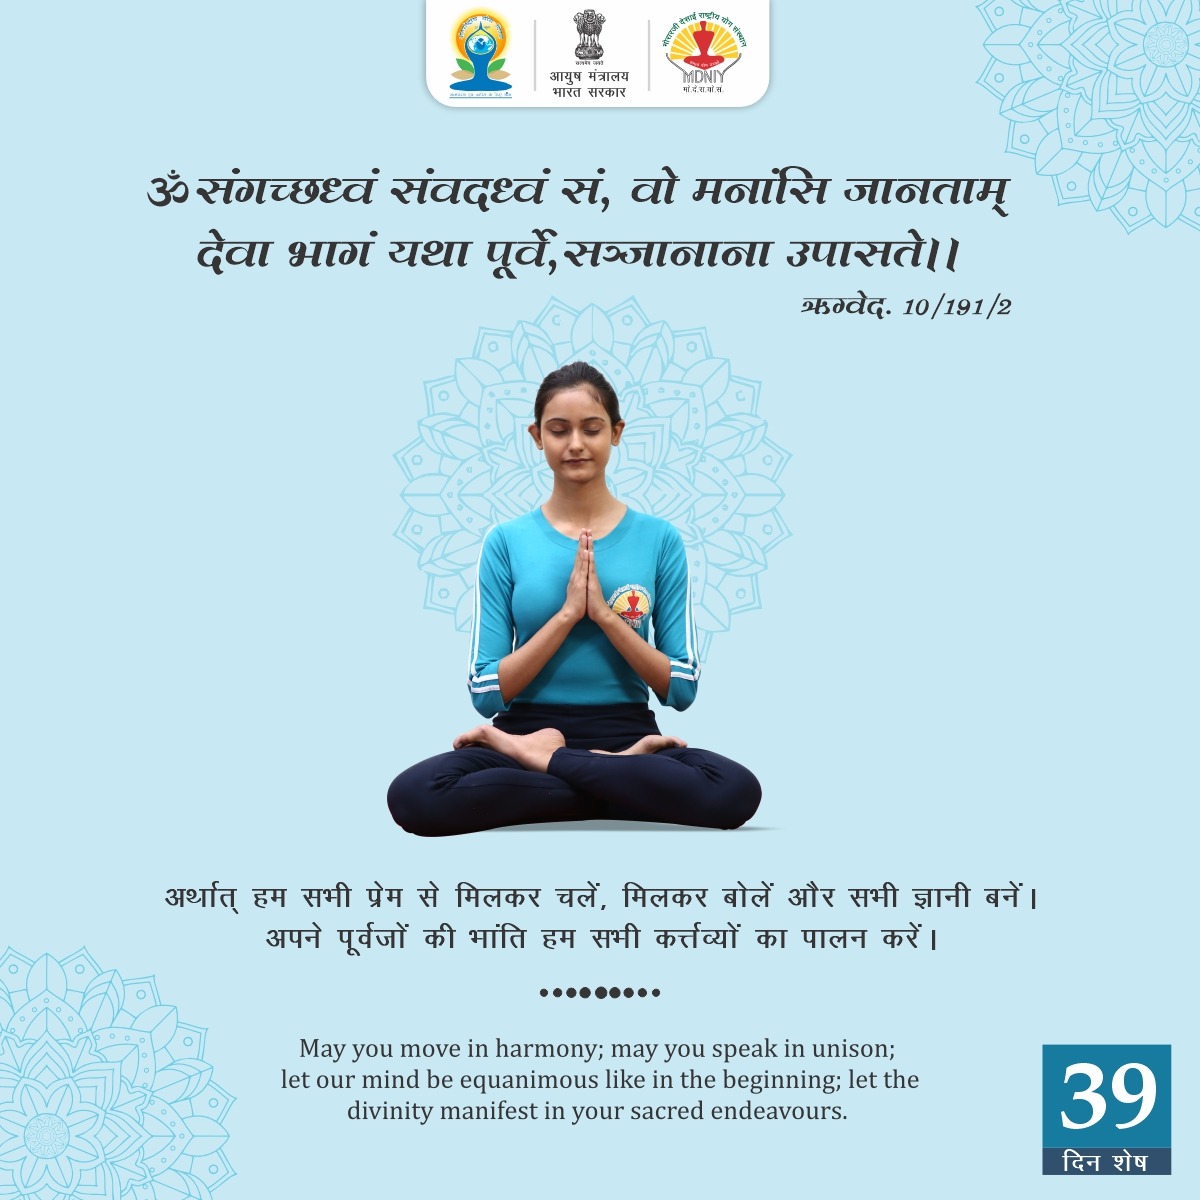 Yogic practice shall start with this prayer or prayerful mood to enhance the benefits of practice. Learn this and be a part of IDY 2024! #Yoga #yogapractice #prayers #Hathayoga #mantra #meditation